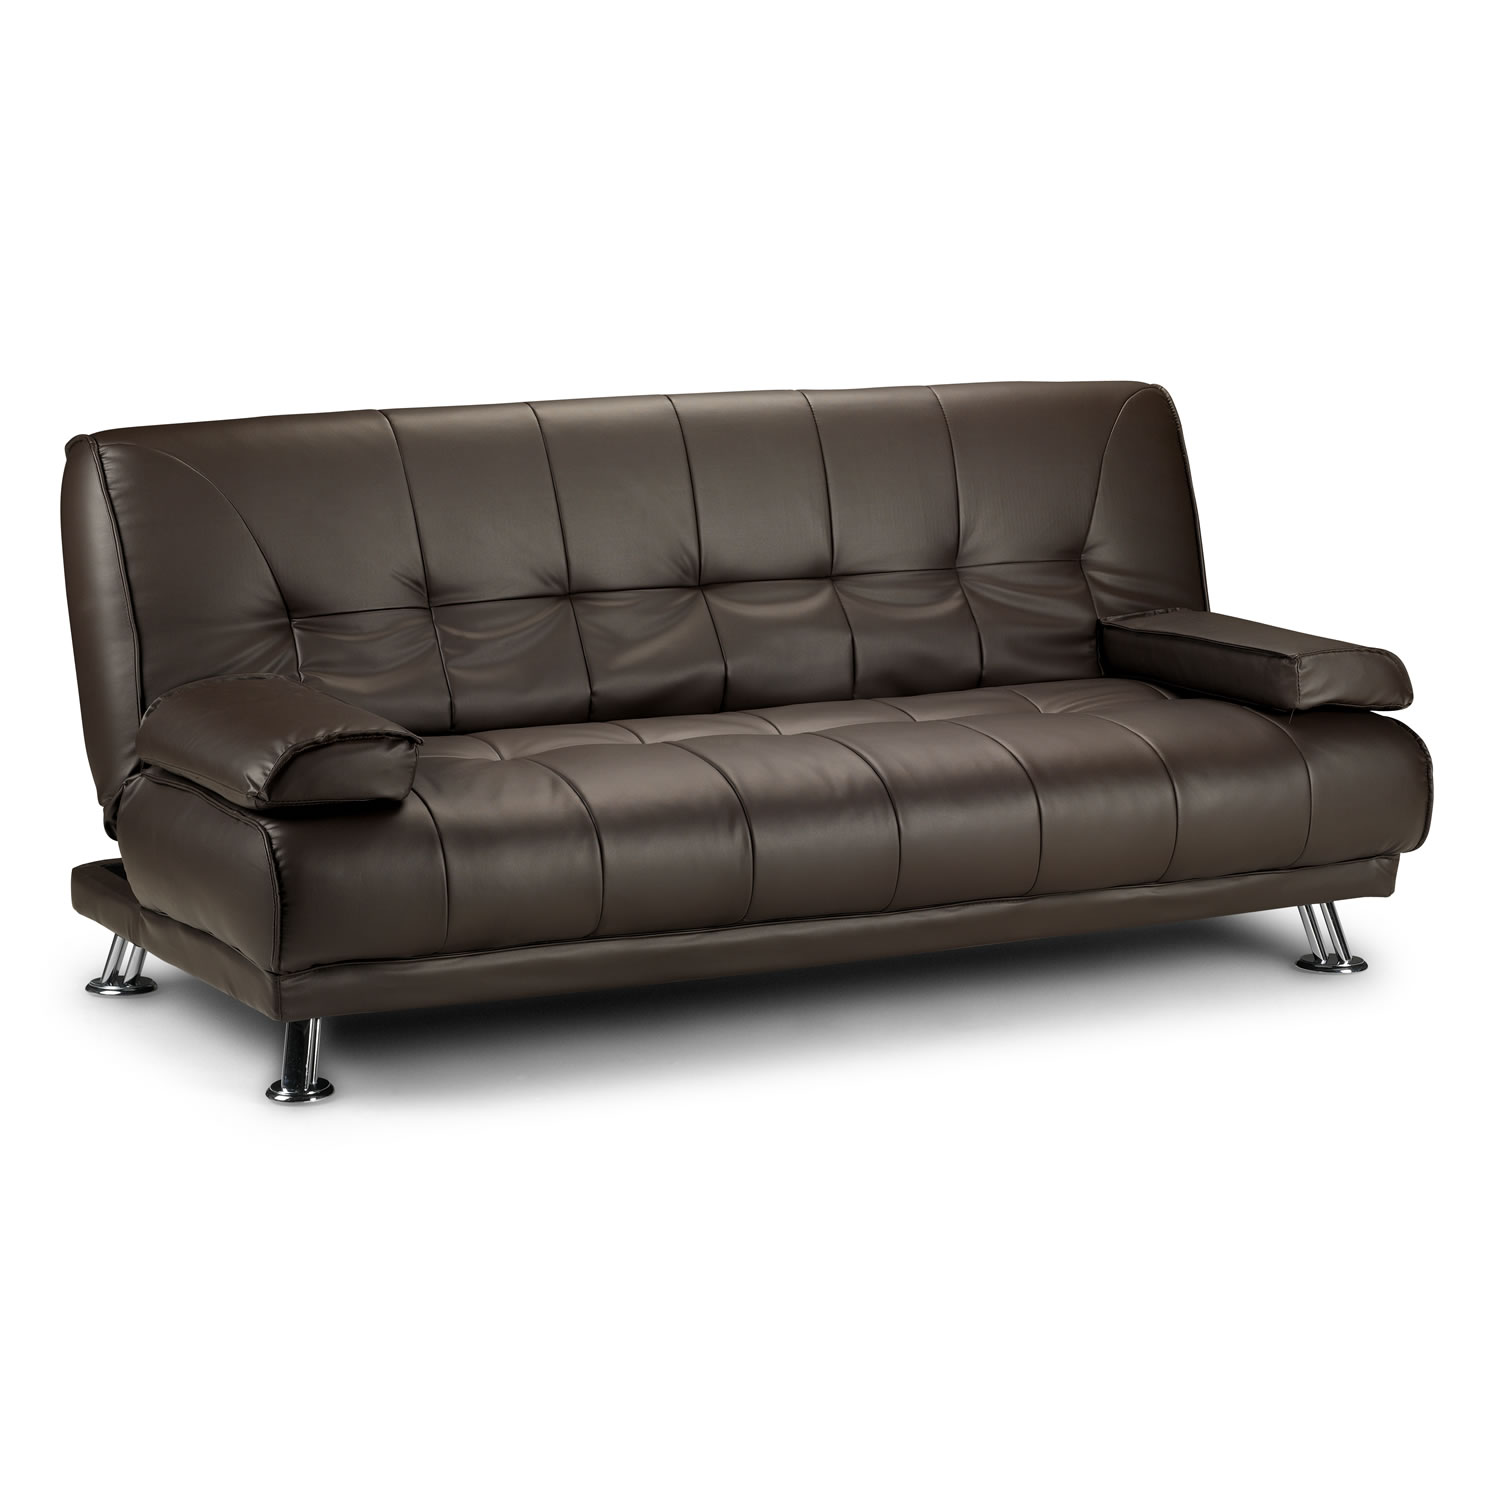 leather sofa bed venice sofa bed - next day delivery venice sofa bed XNLBDGS